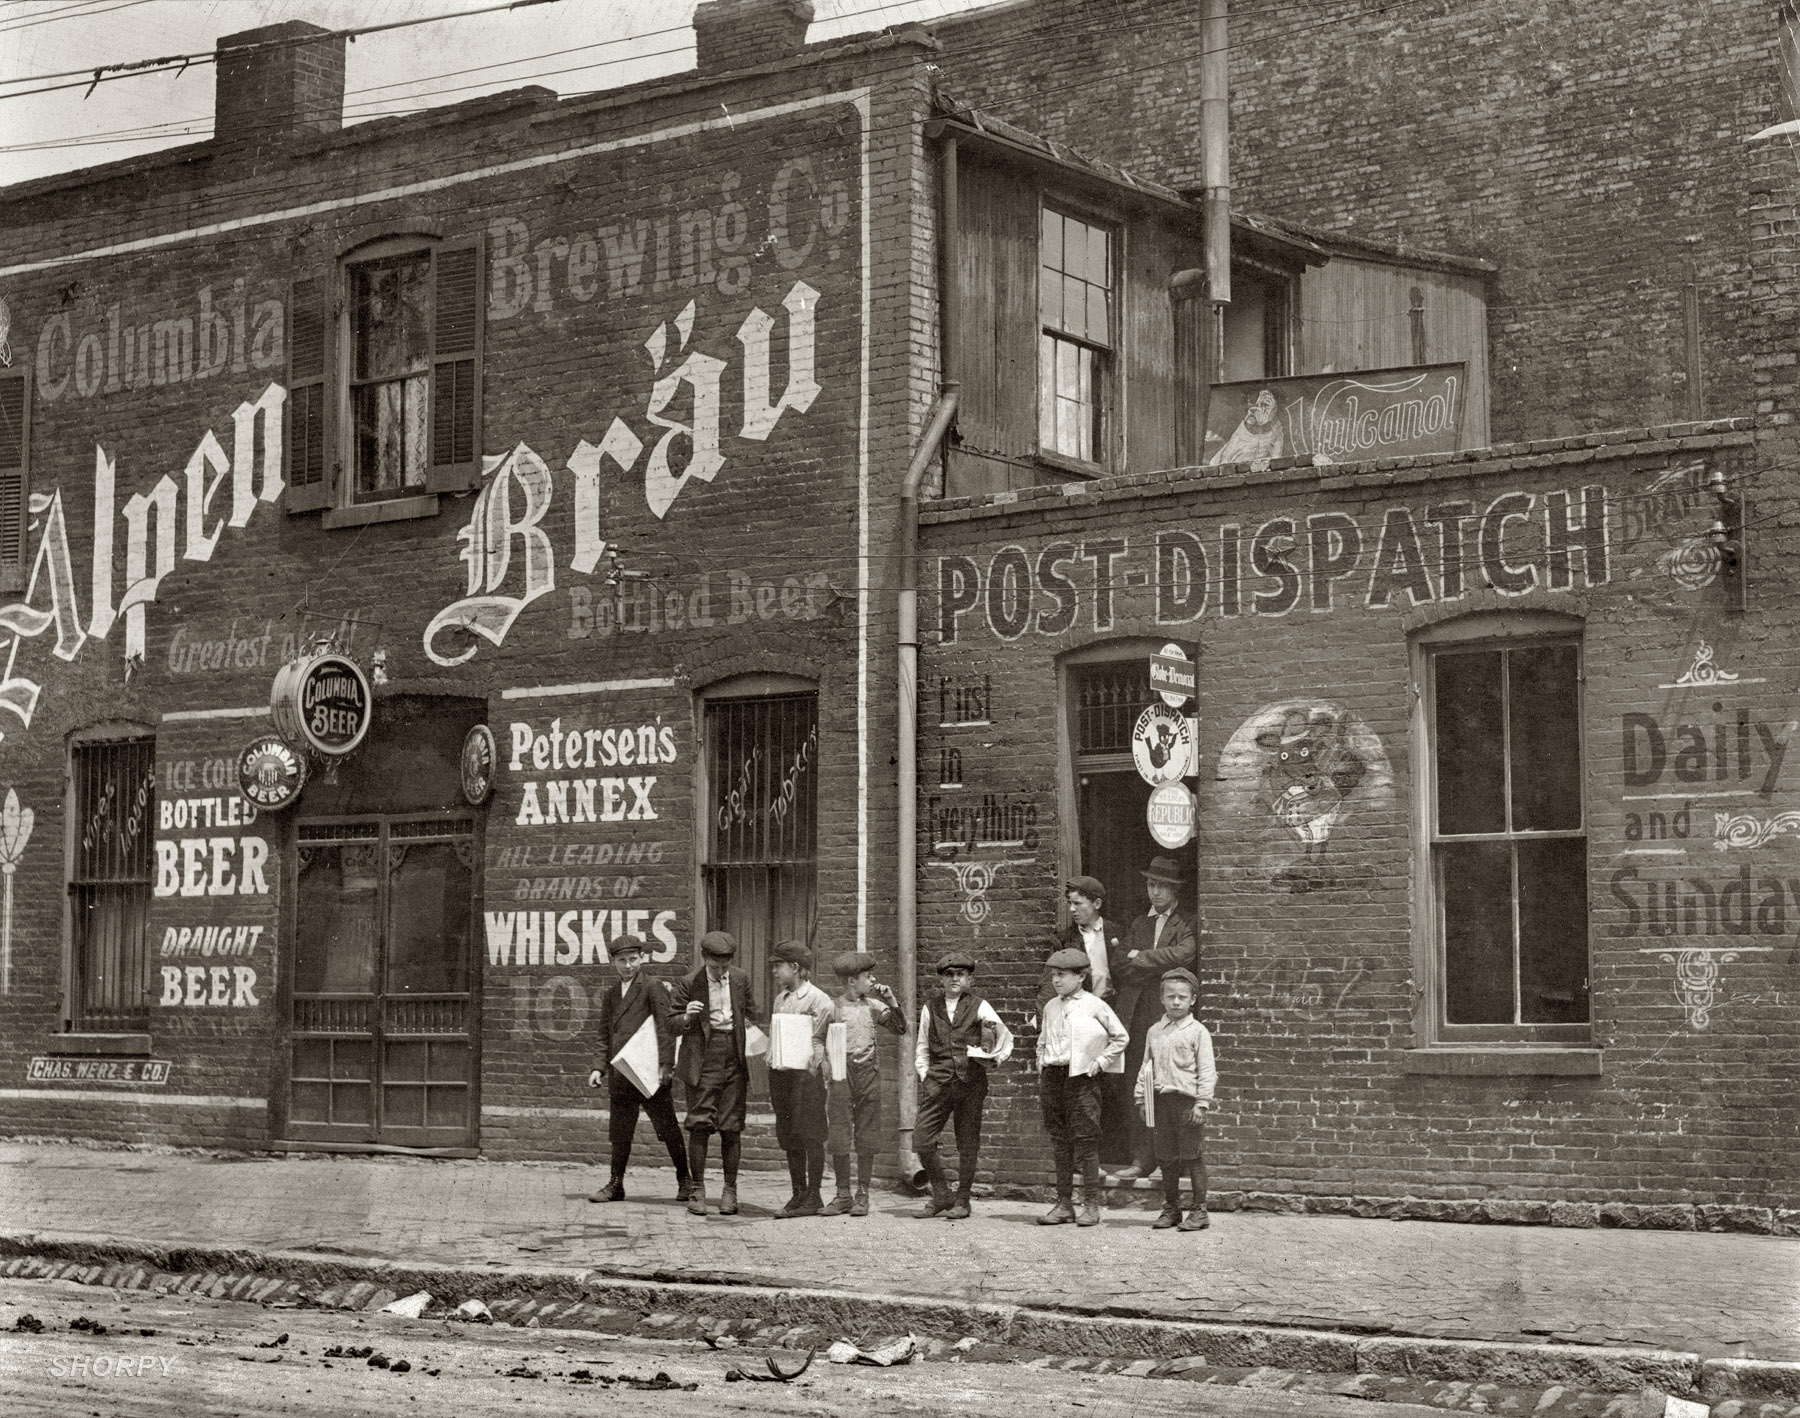 St. Louis, Missouri. May 1910. "Newsies. Johnston's Branch adjoining Saloon at 10th & Cass Street." Photograph by Lewis Wickes Hine. View full size.